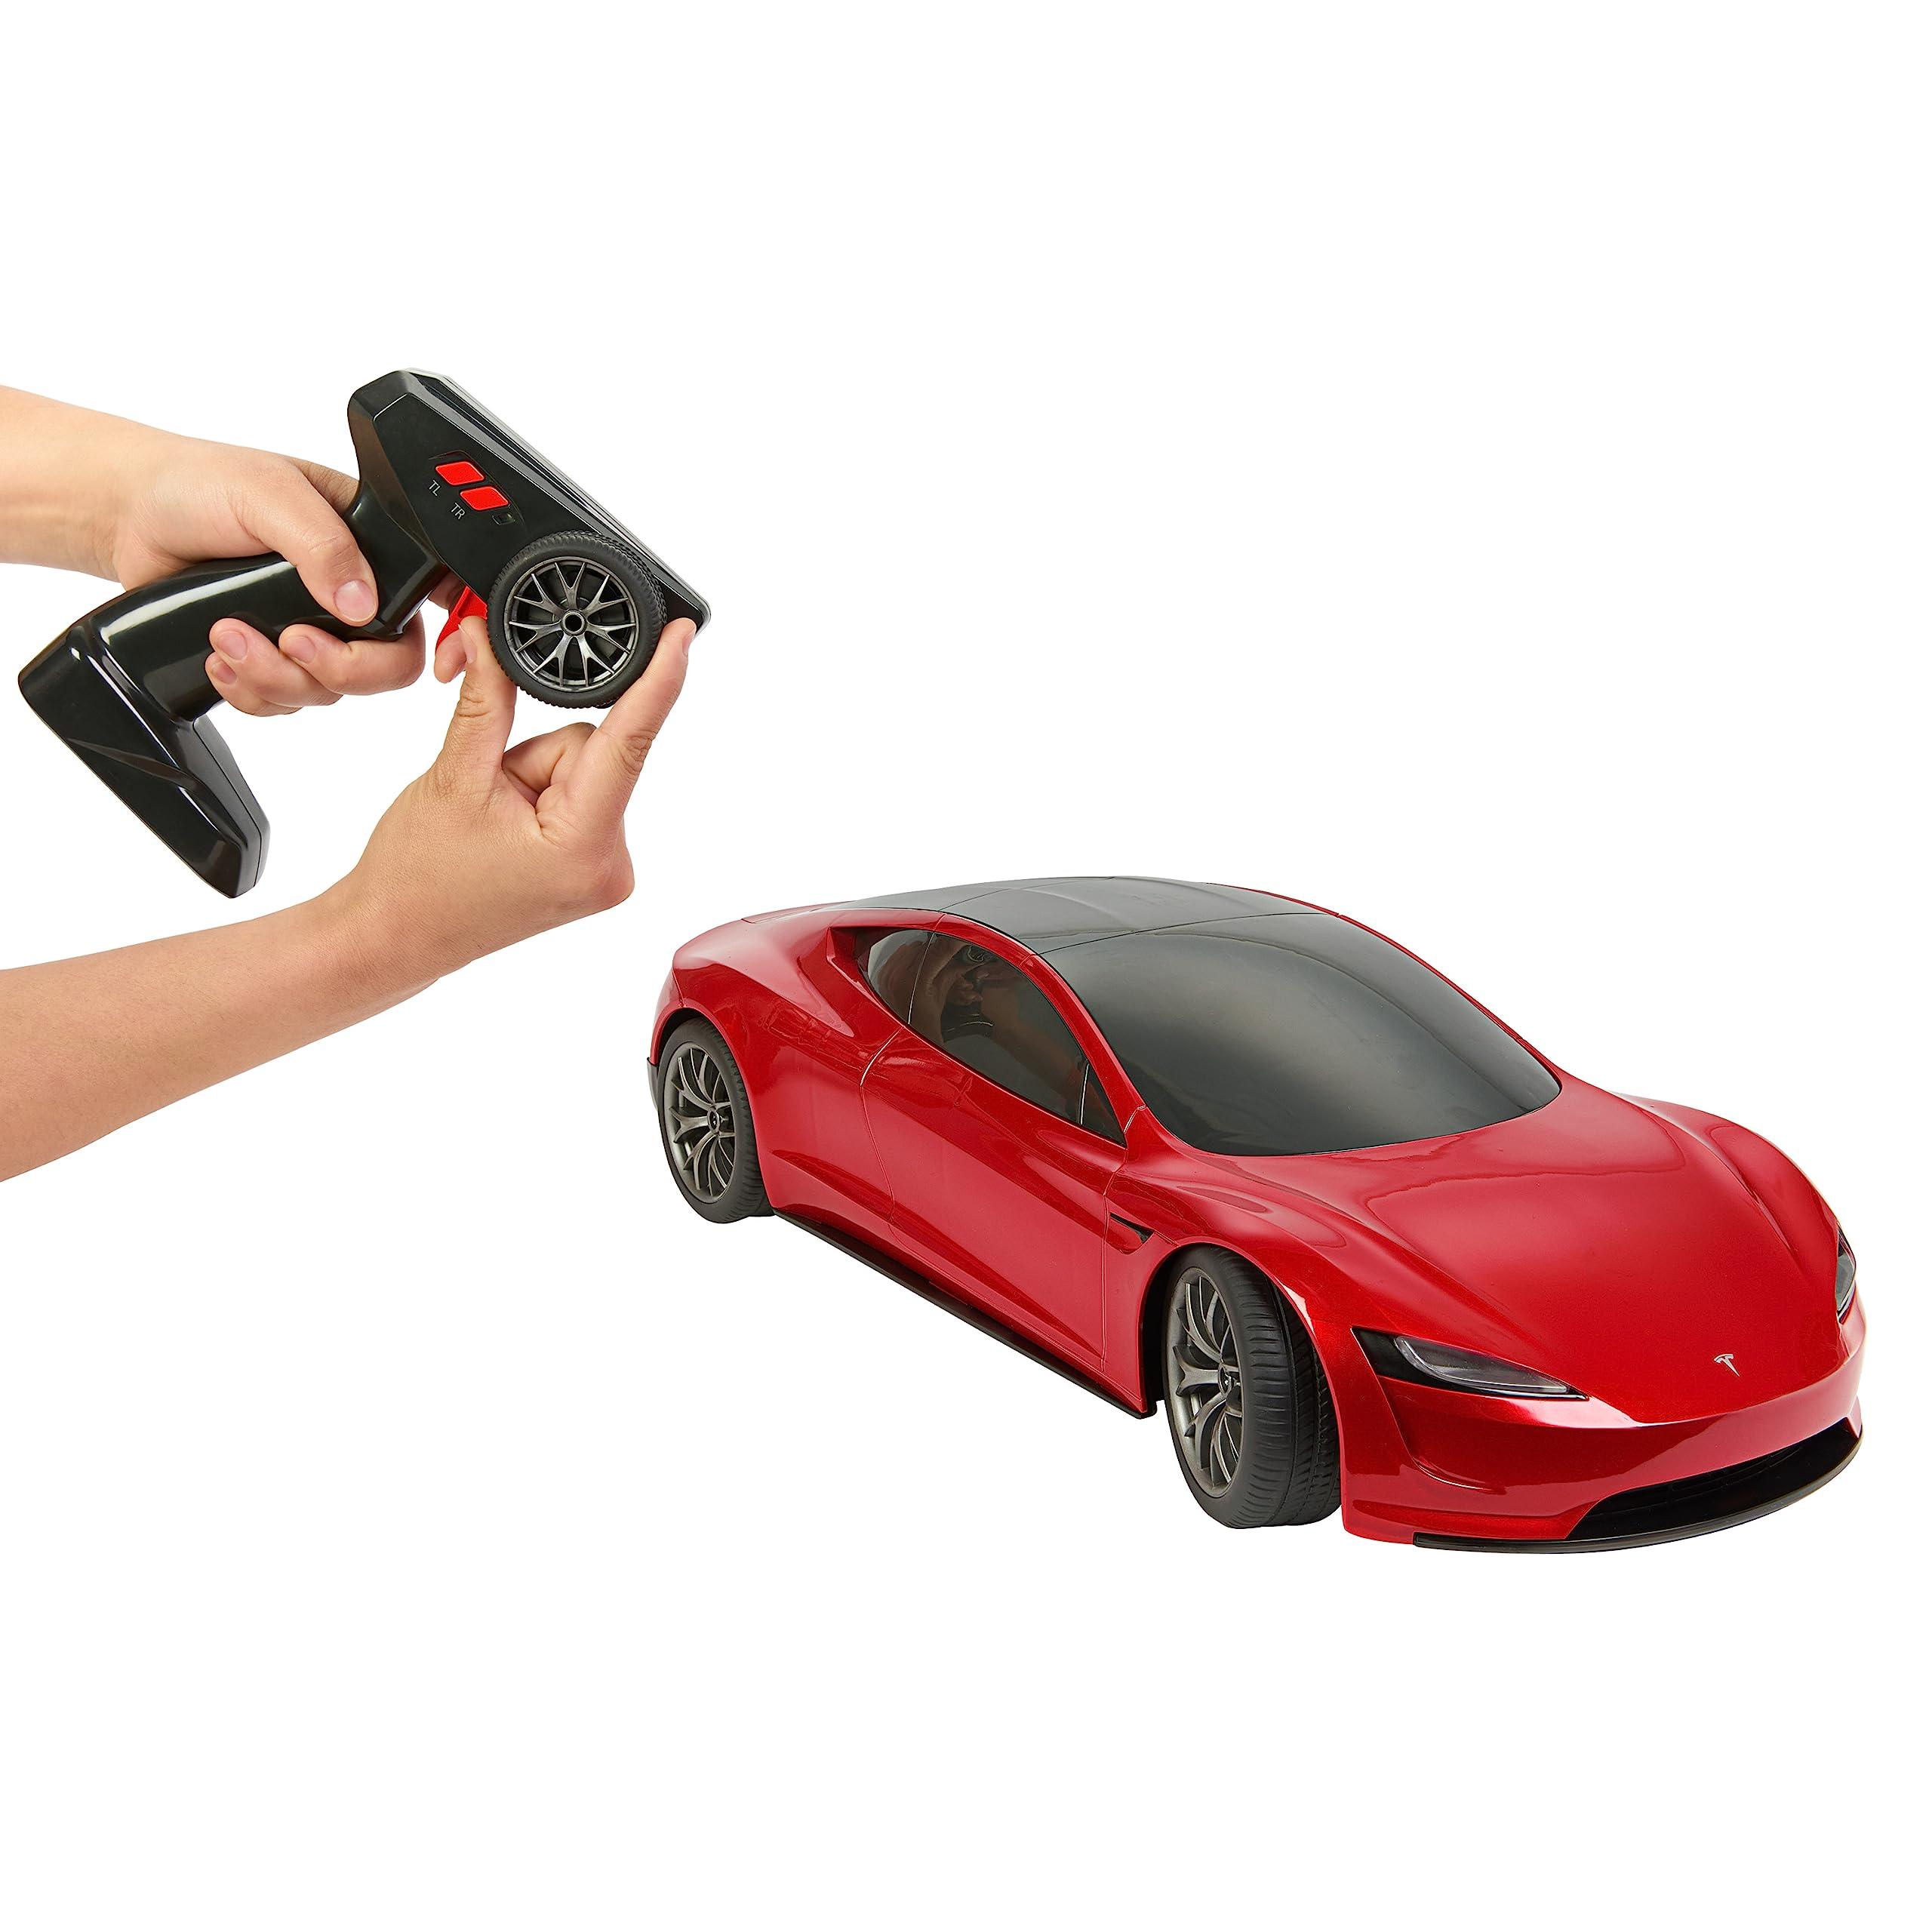 Remote Control Tesla Roadster:  The Tesla Roadster: Designed for Ultimate Performance and Control.